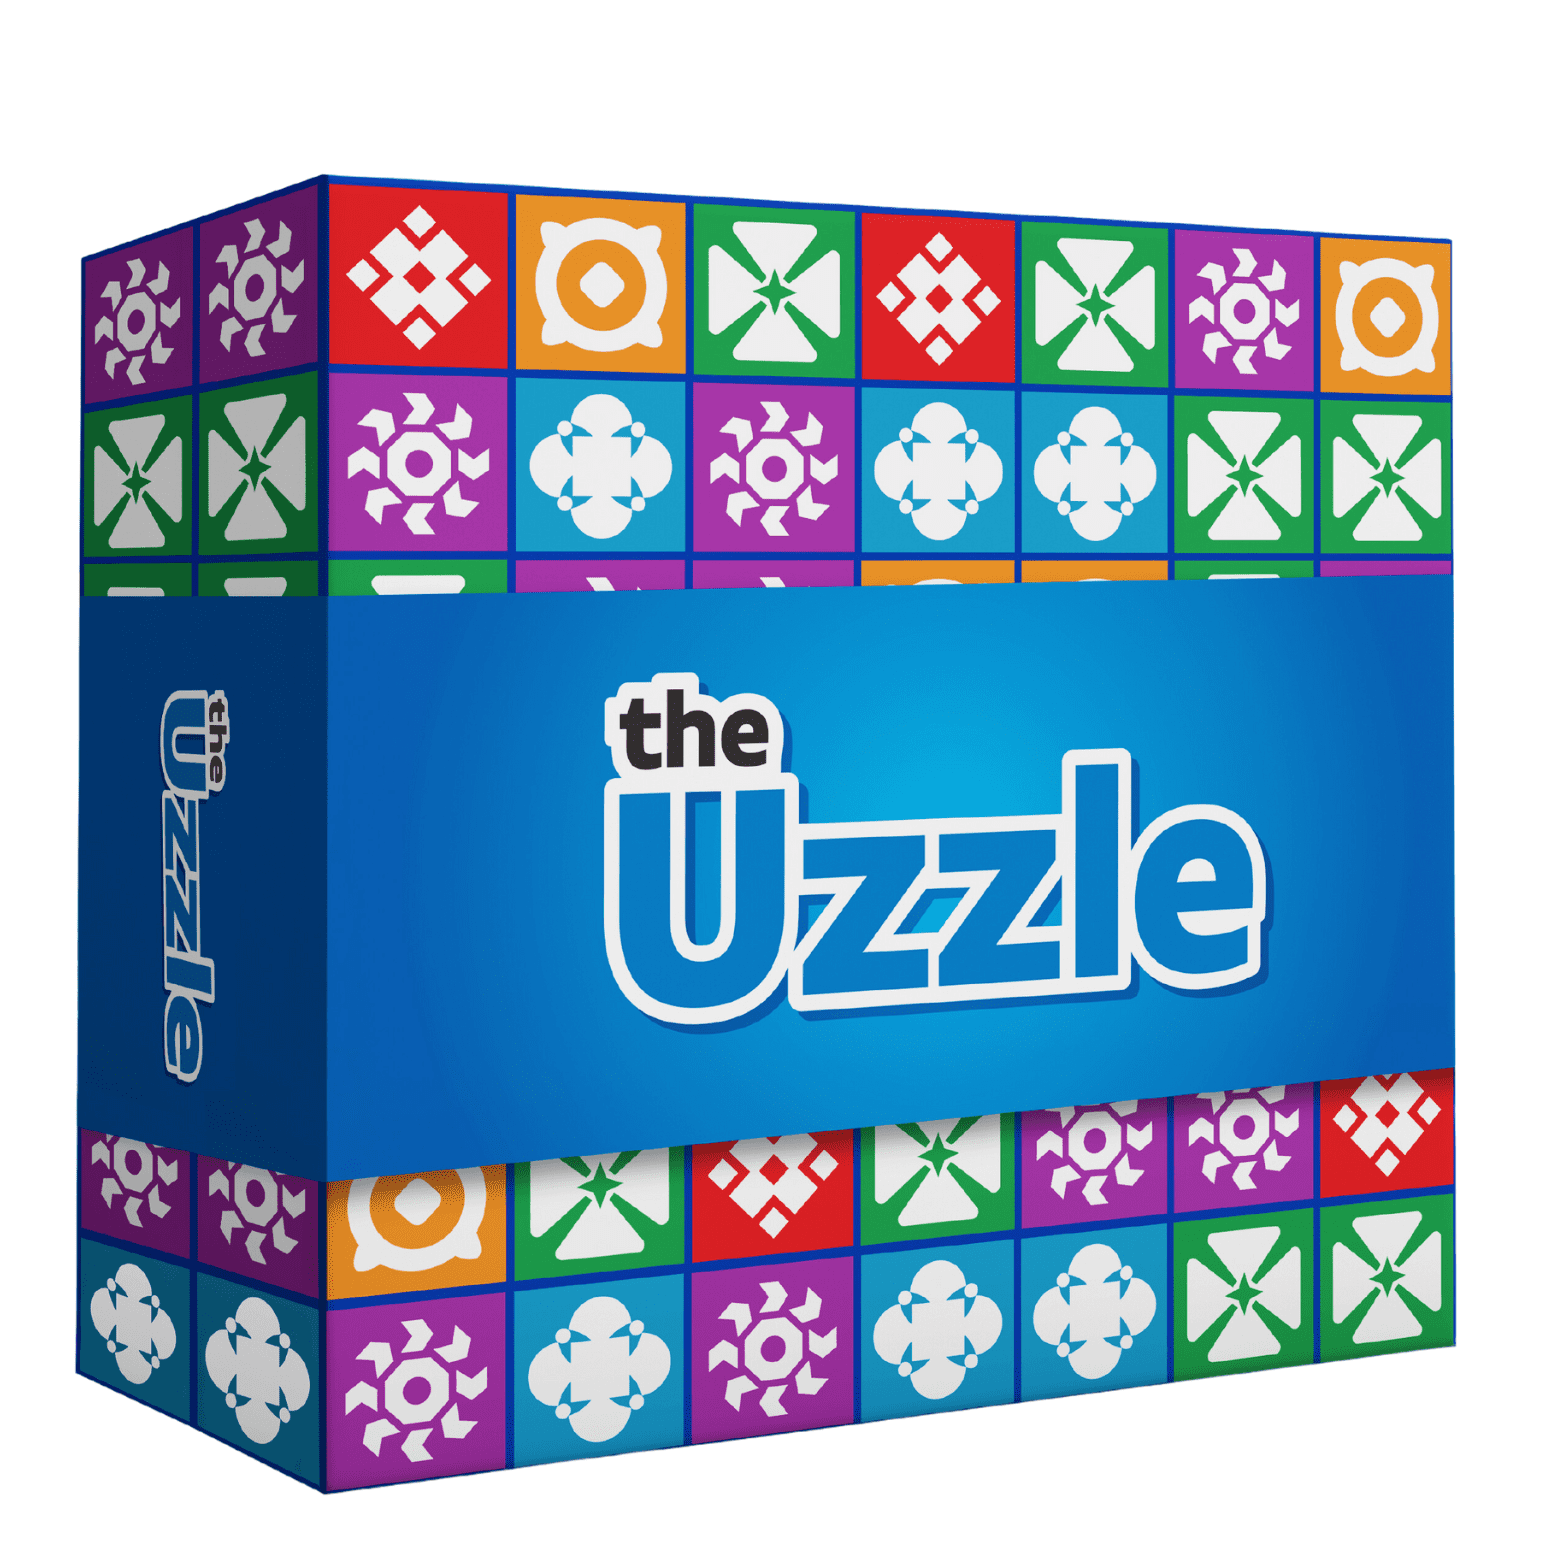 Play the best free online board games & puzzle games